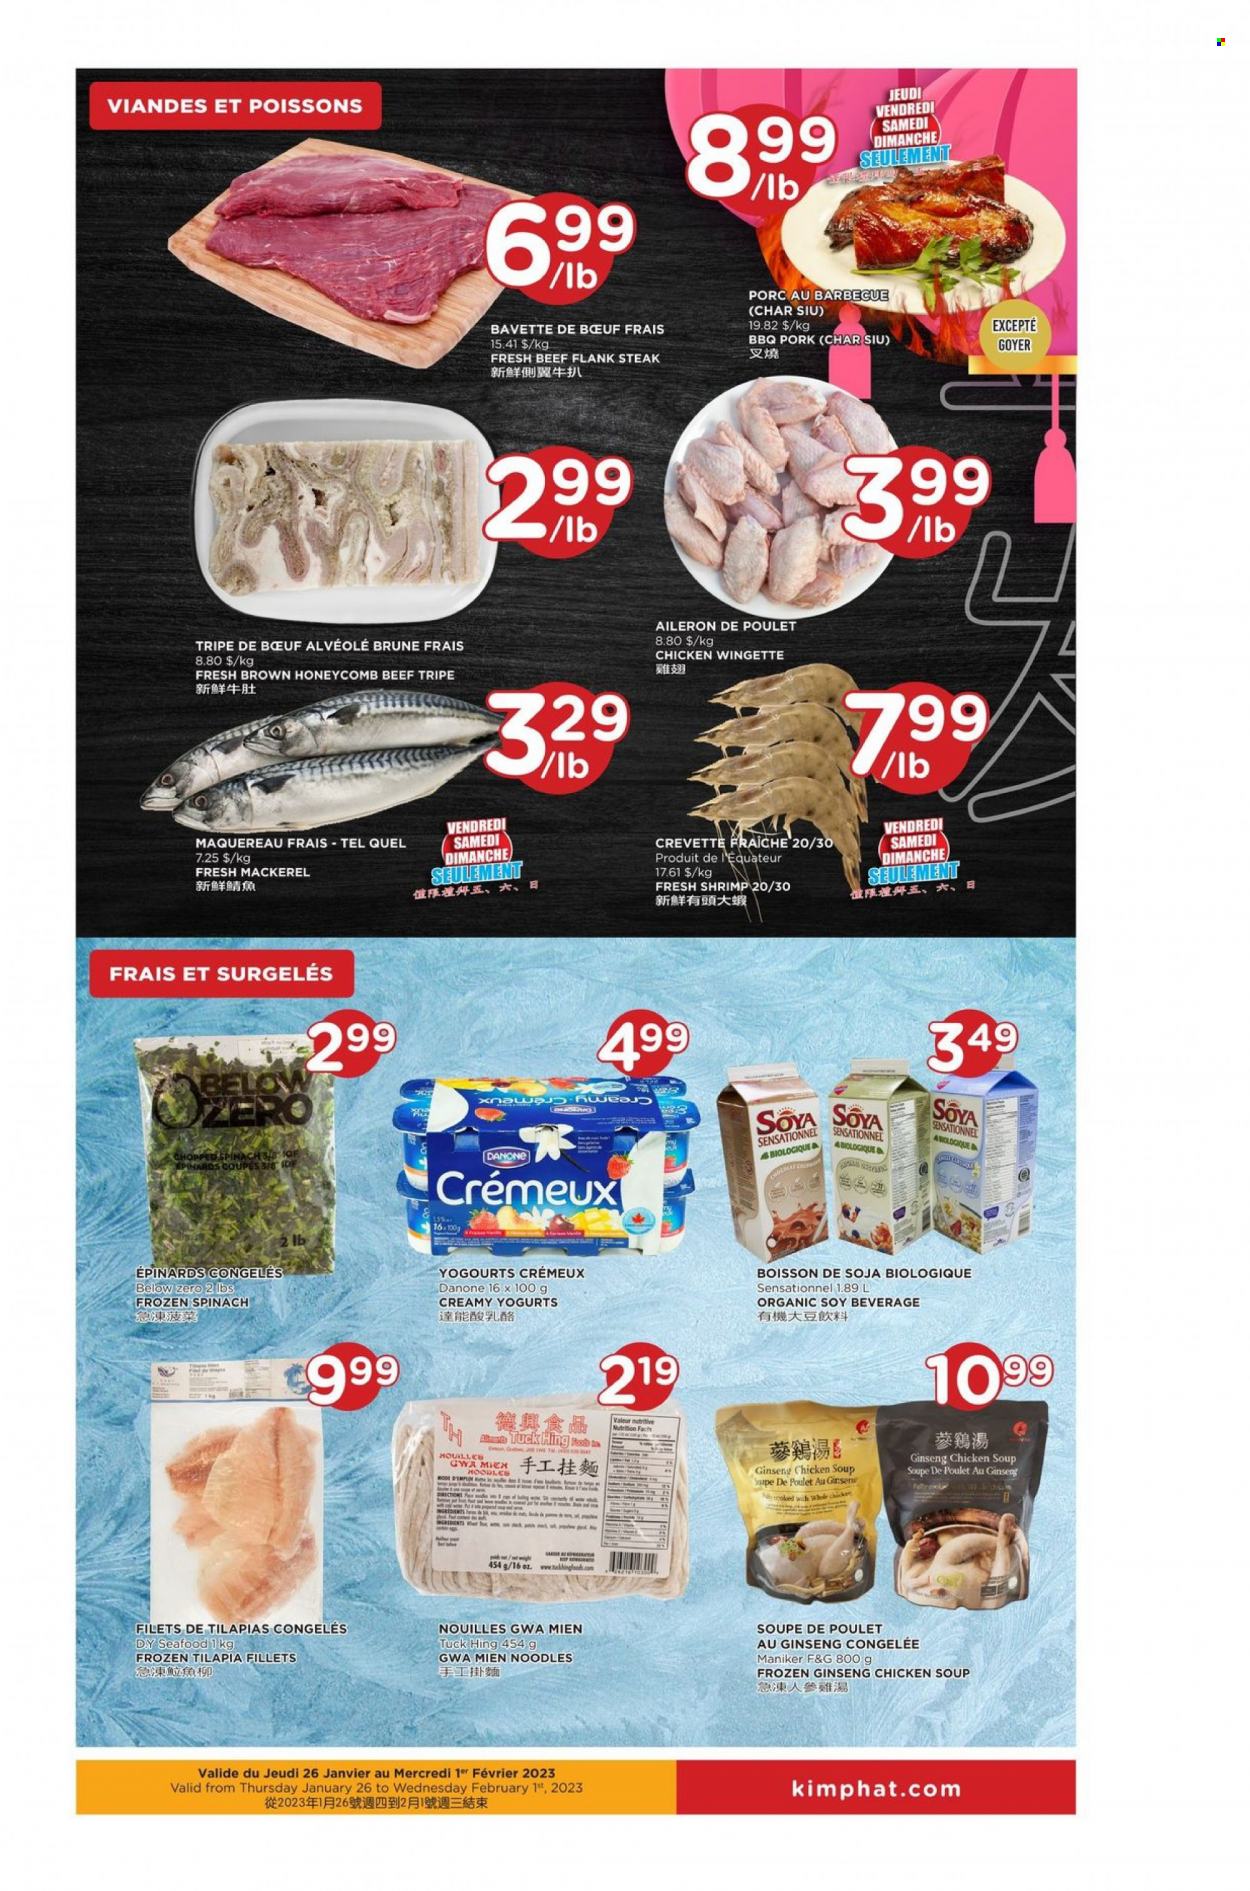 thumbnail - Kim Phat Flyer - January 26, 2023 - February 01, 2023 - Sales products - spinach, mackerel, tilapia, seafood, shrimps, chicken soup, soup, noodles, beef meat, beef tripe, flank steak, steak, Danone. Page 4.